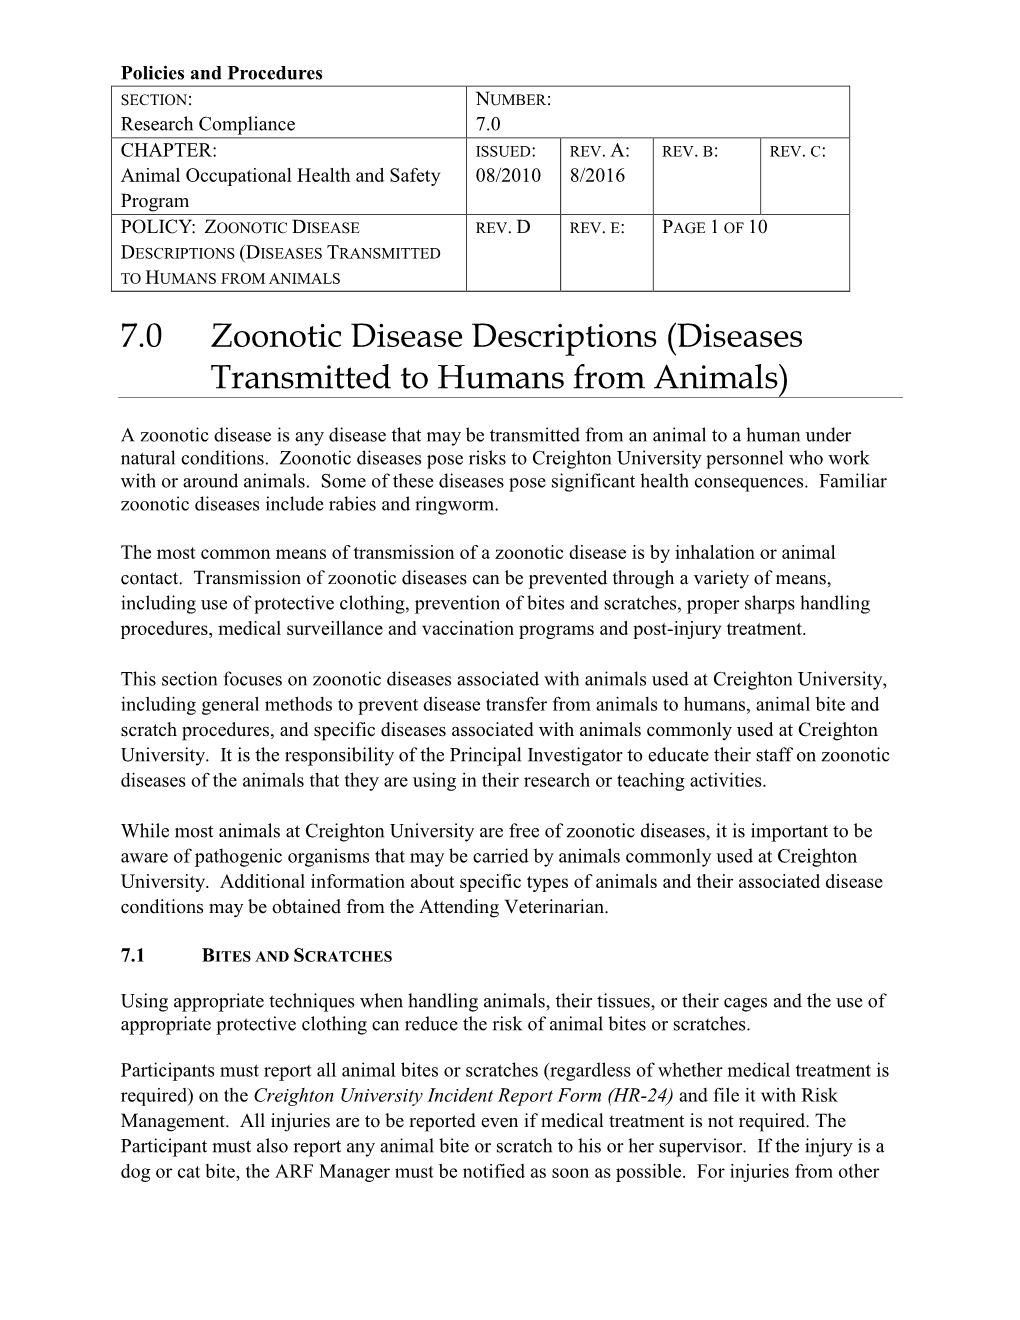 7.0 Zoonotic Disease Descriptions (Diseases Transmitted to Humans from Animals)